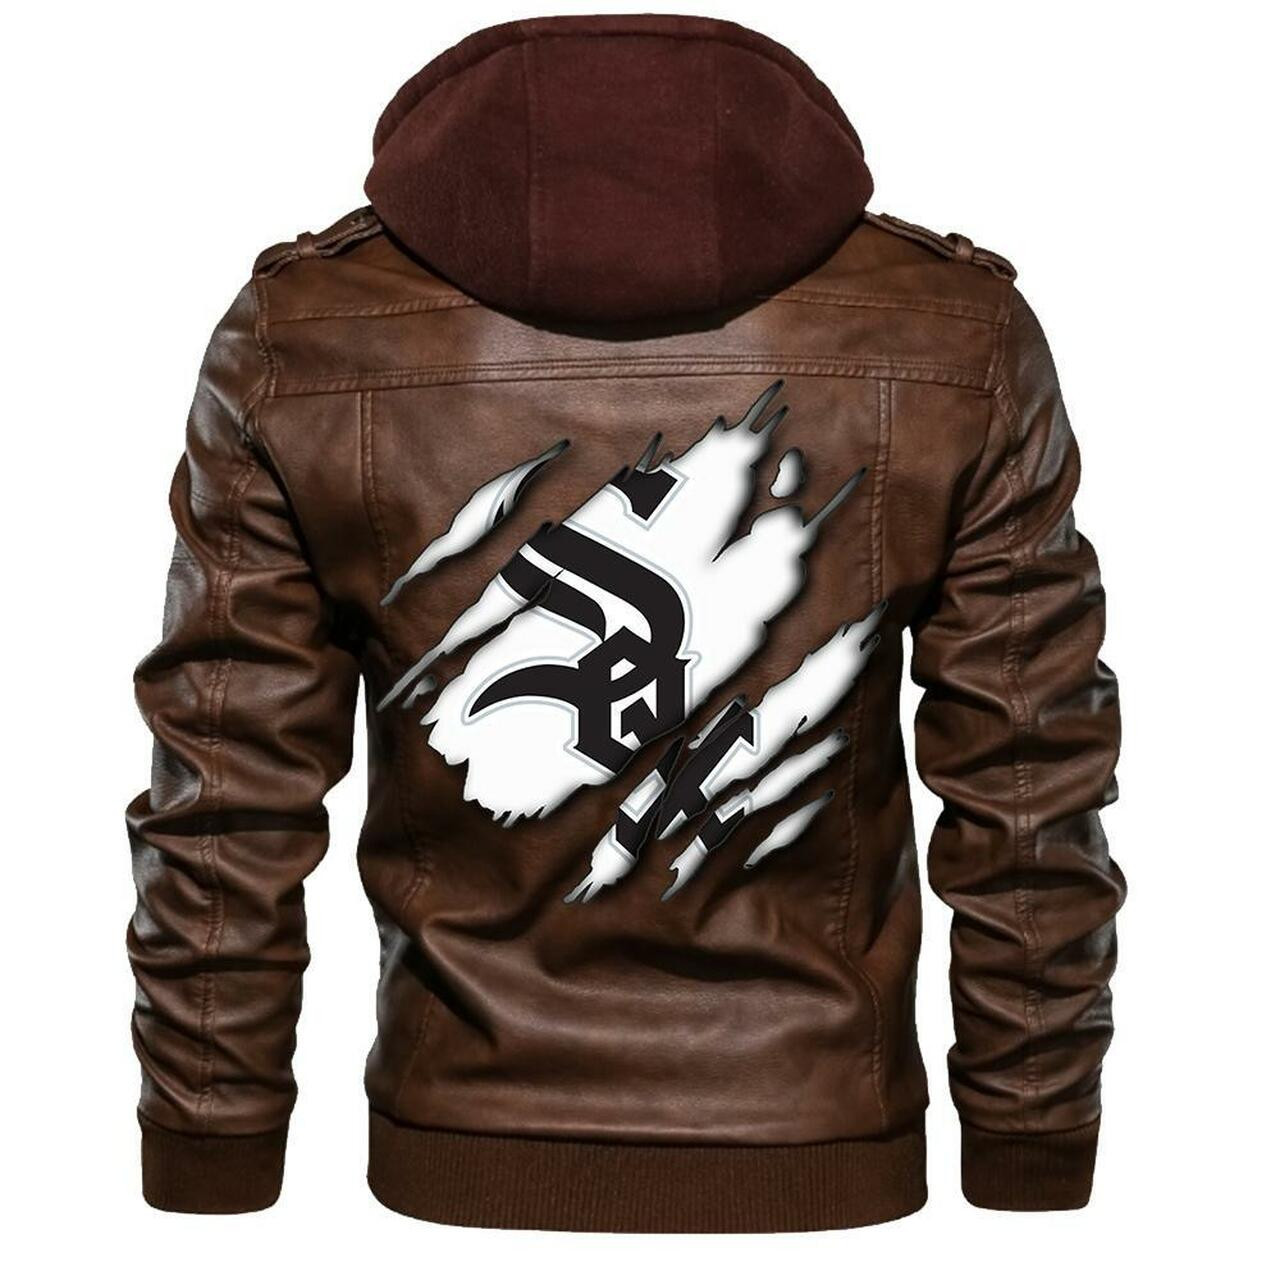 You can find Leather Jacket online at a great price 91